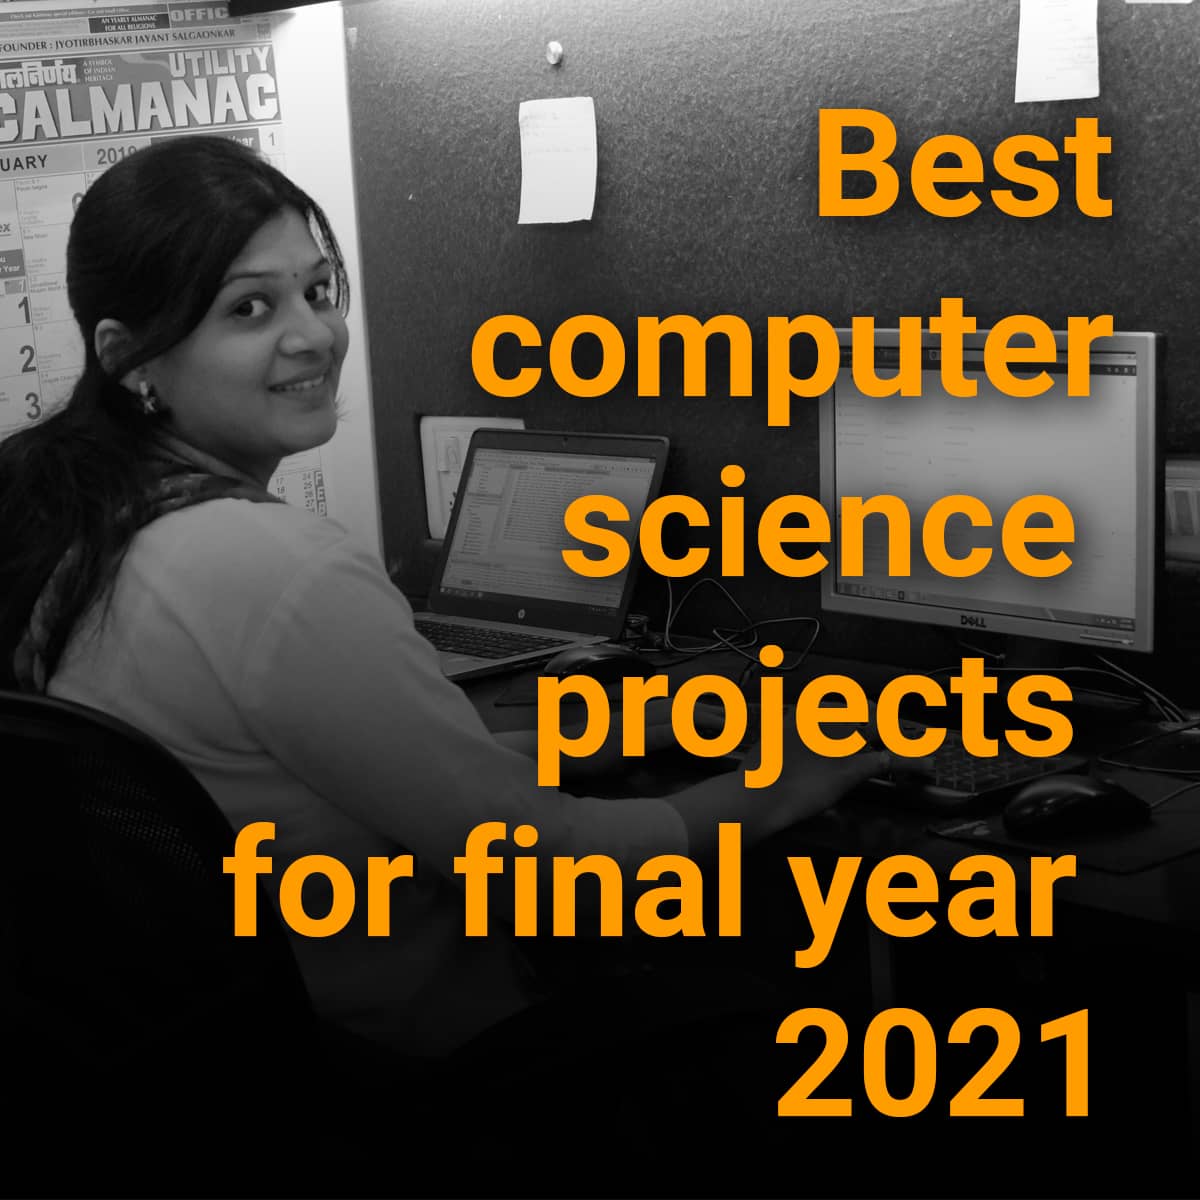 Best computer science projects for final year 2021